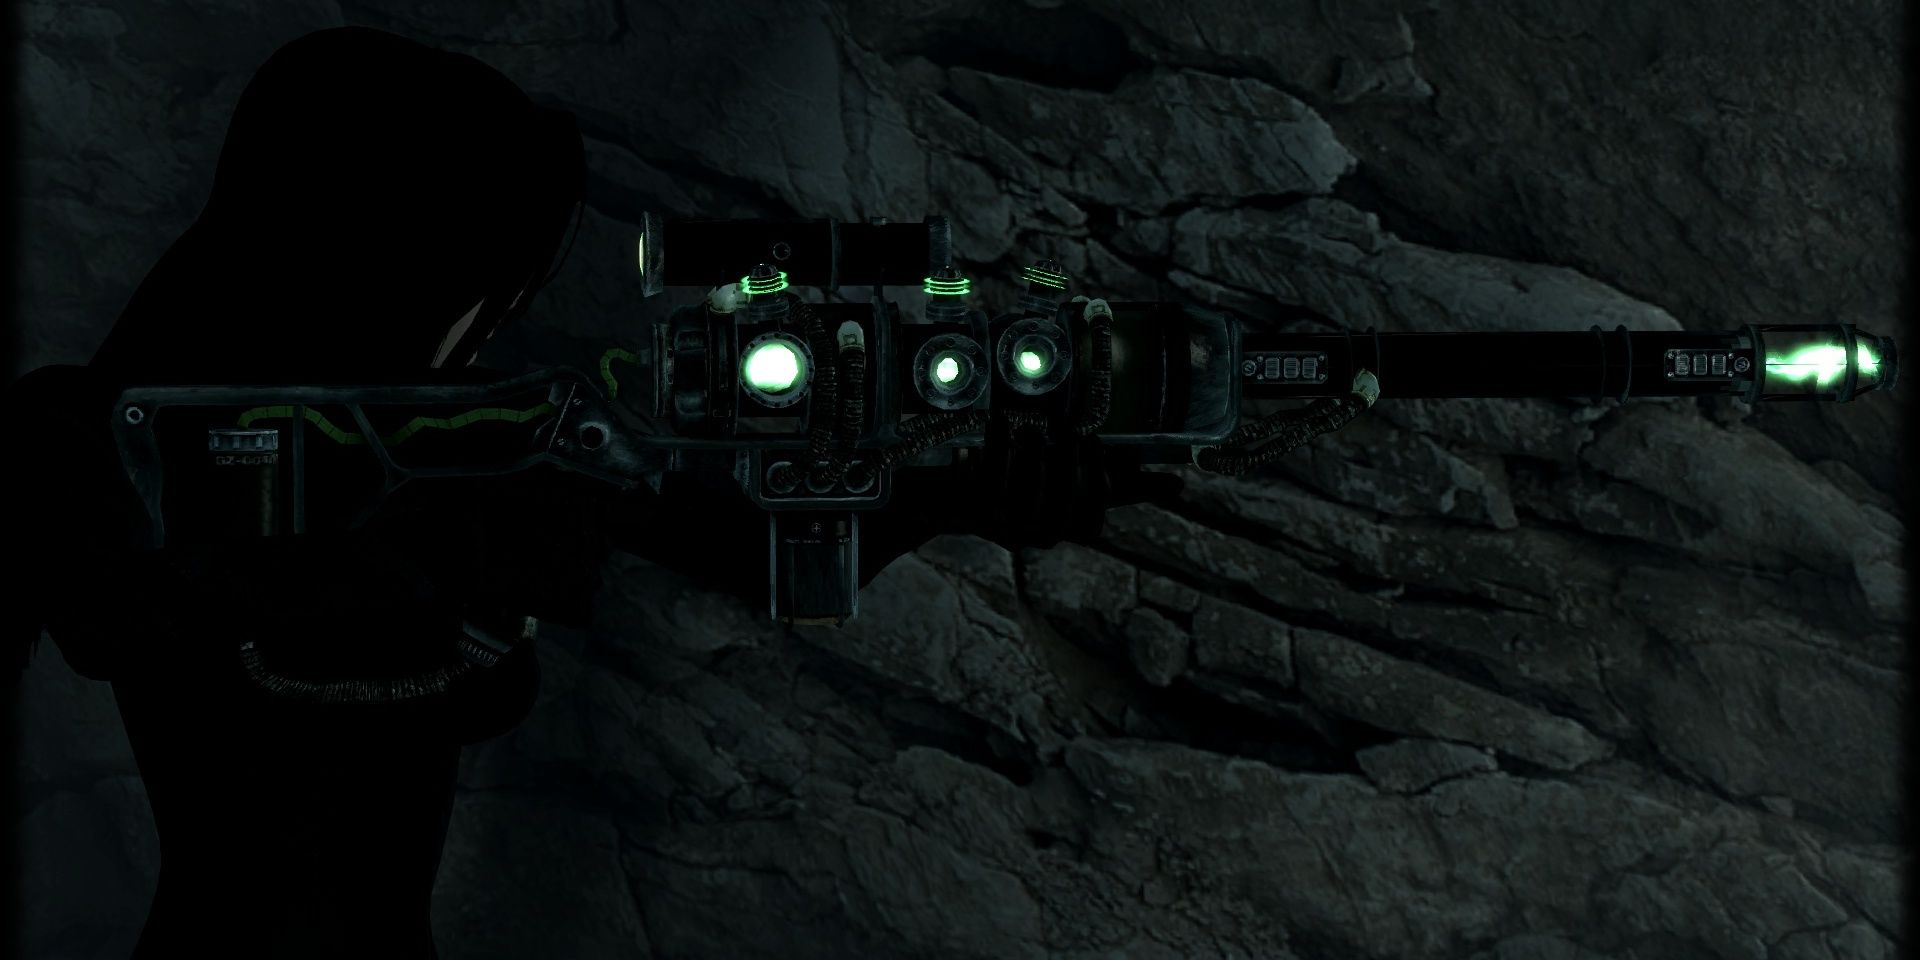 A player holding a Plasma Sniper in the Energy Visuals Enhanced mod in Fallout 3